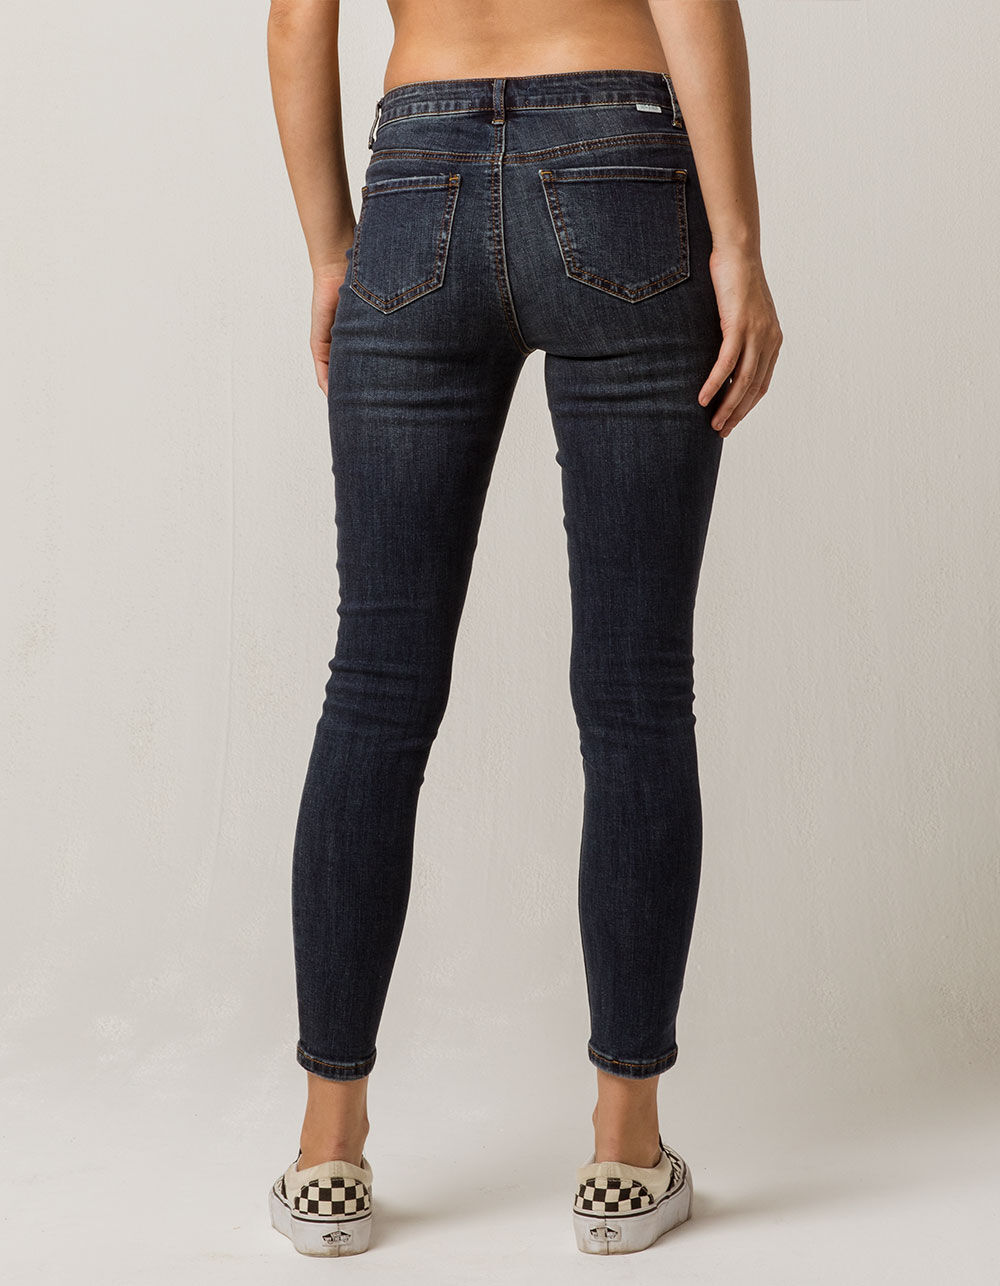 SKY AND SPARROW Lace Up High Waisted Womens Skinny Jeans image number 2